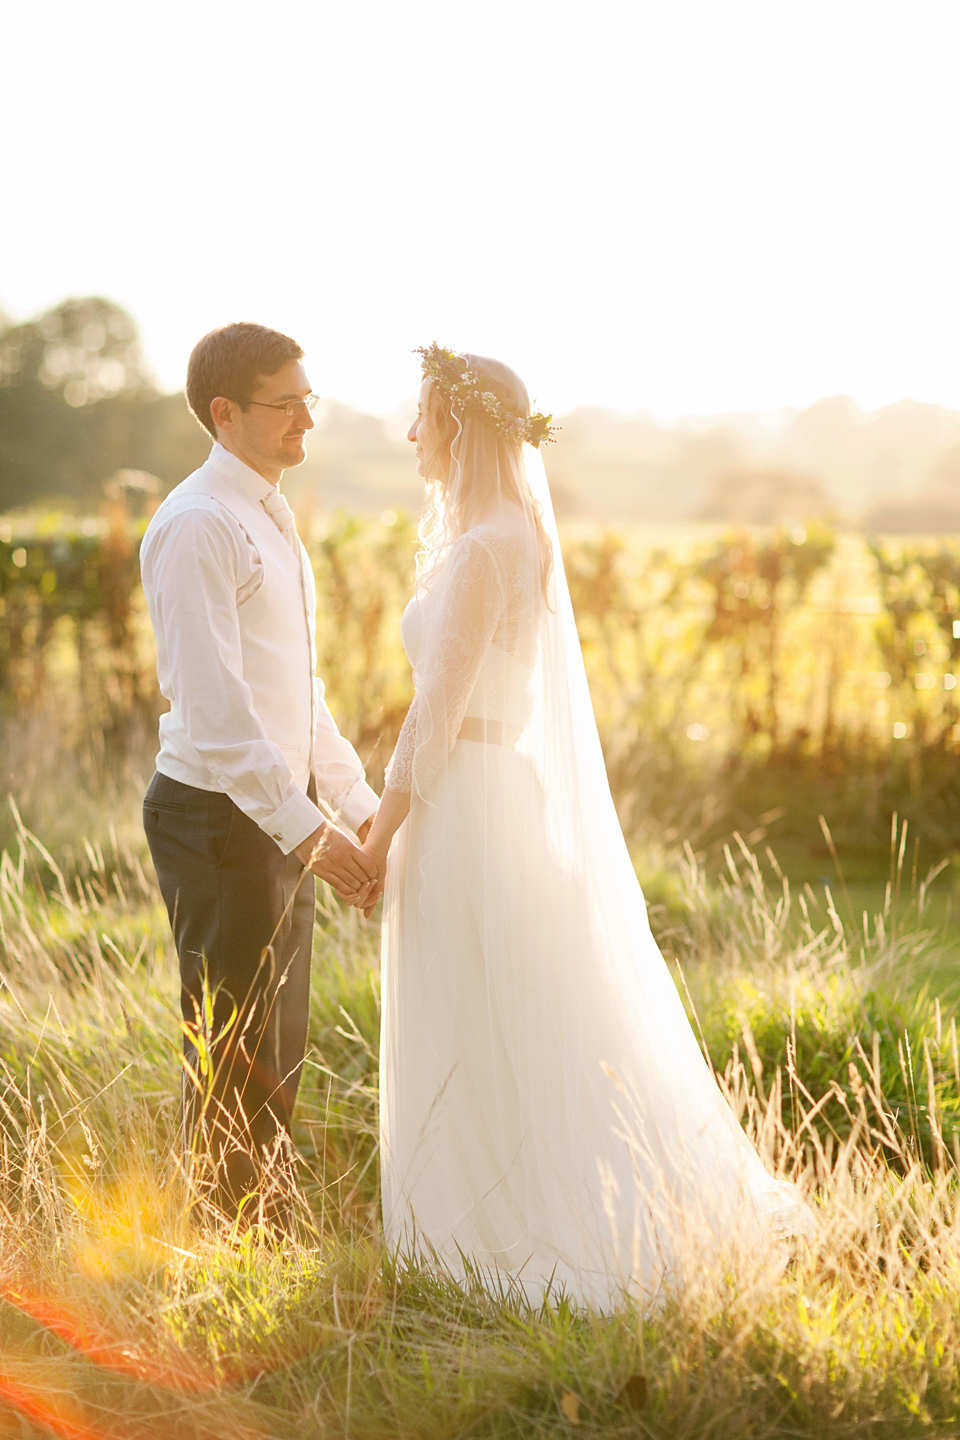 A Watters Wedding Dress for a Lavender and Lemons Inspired Wedding. Photography by Jo Bradbury.